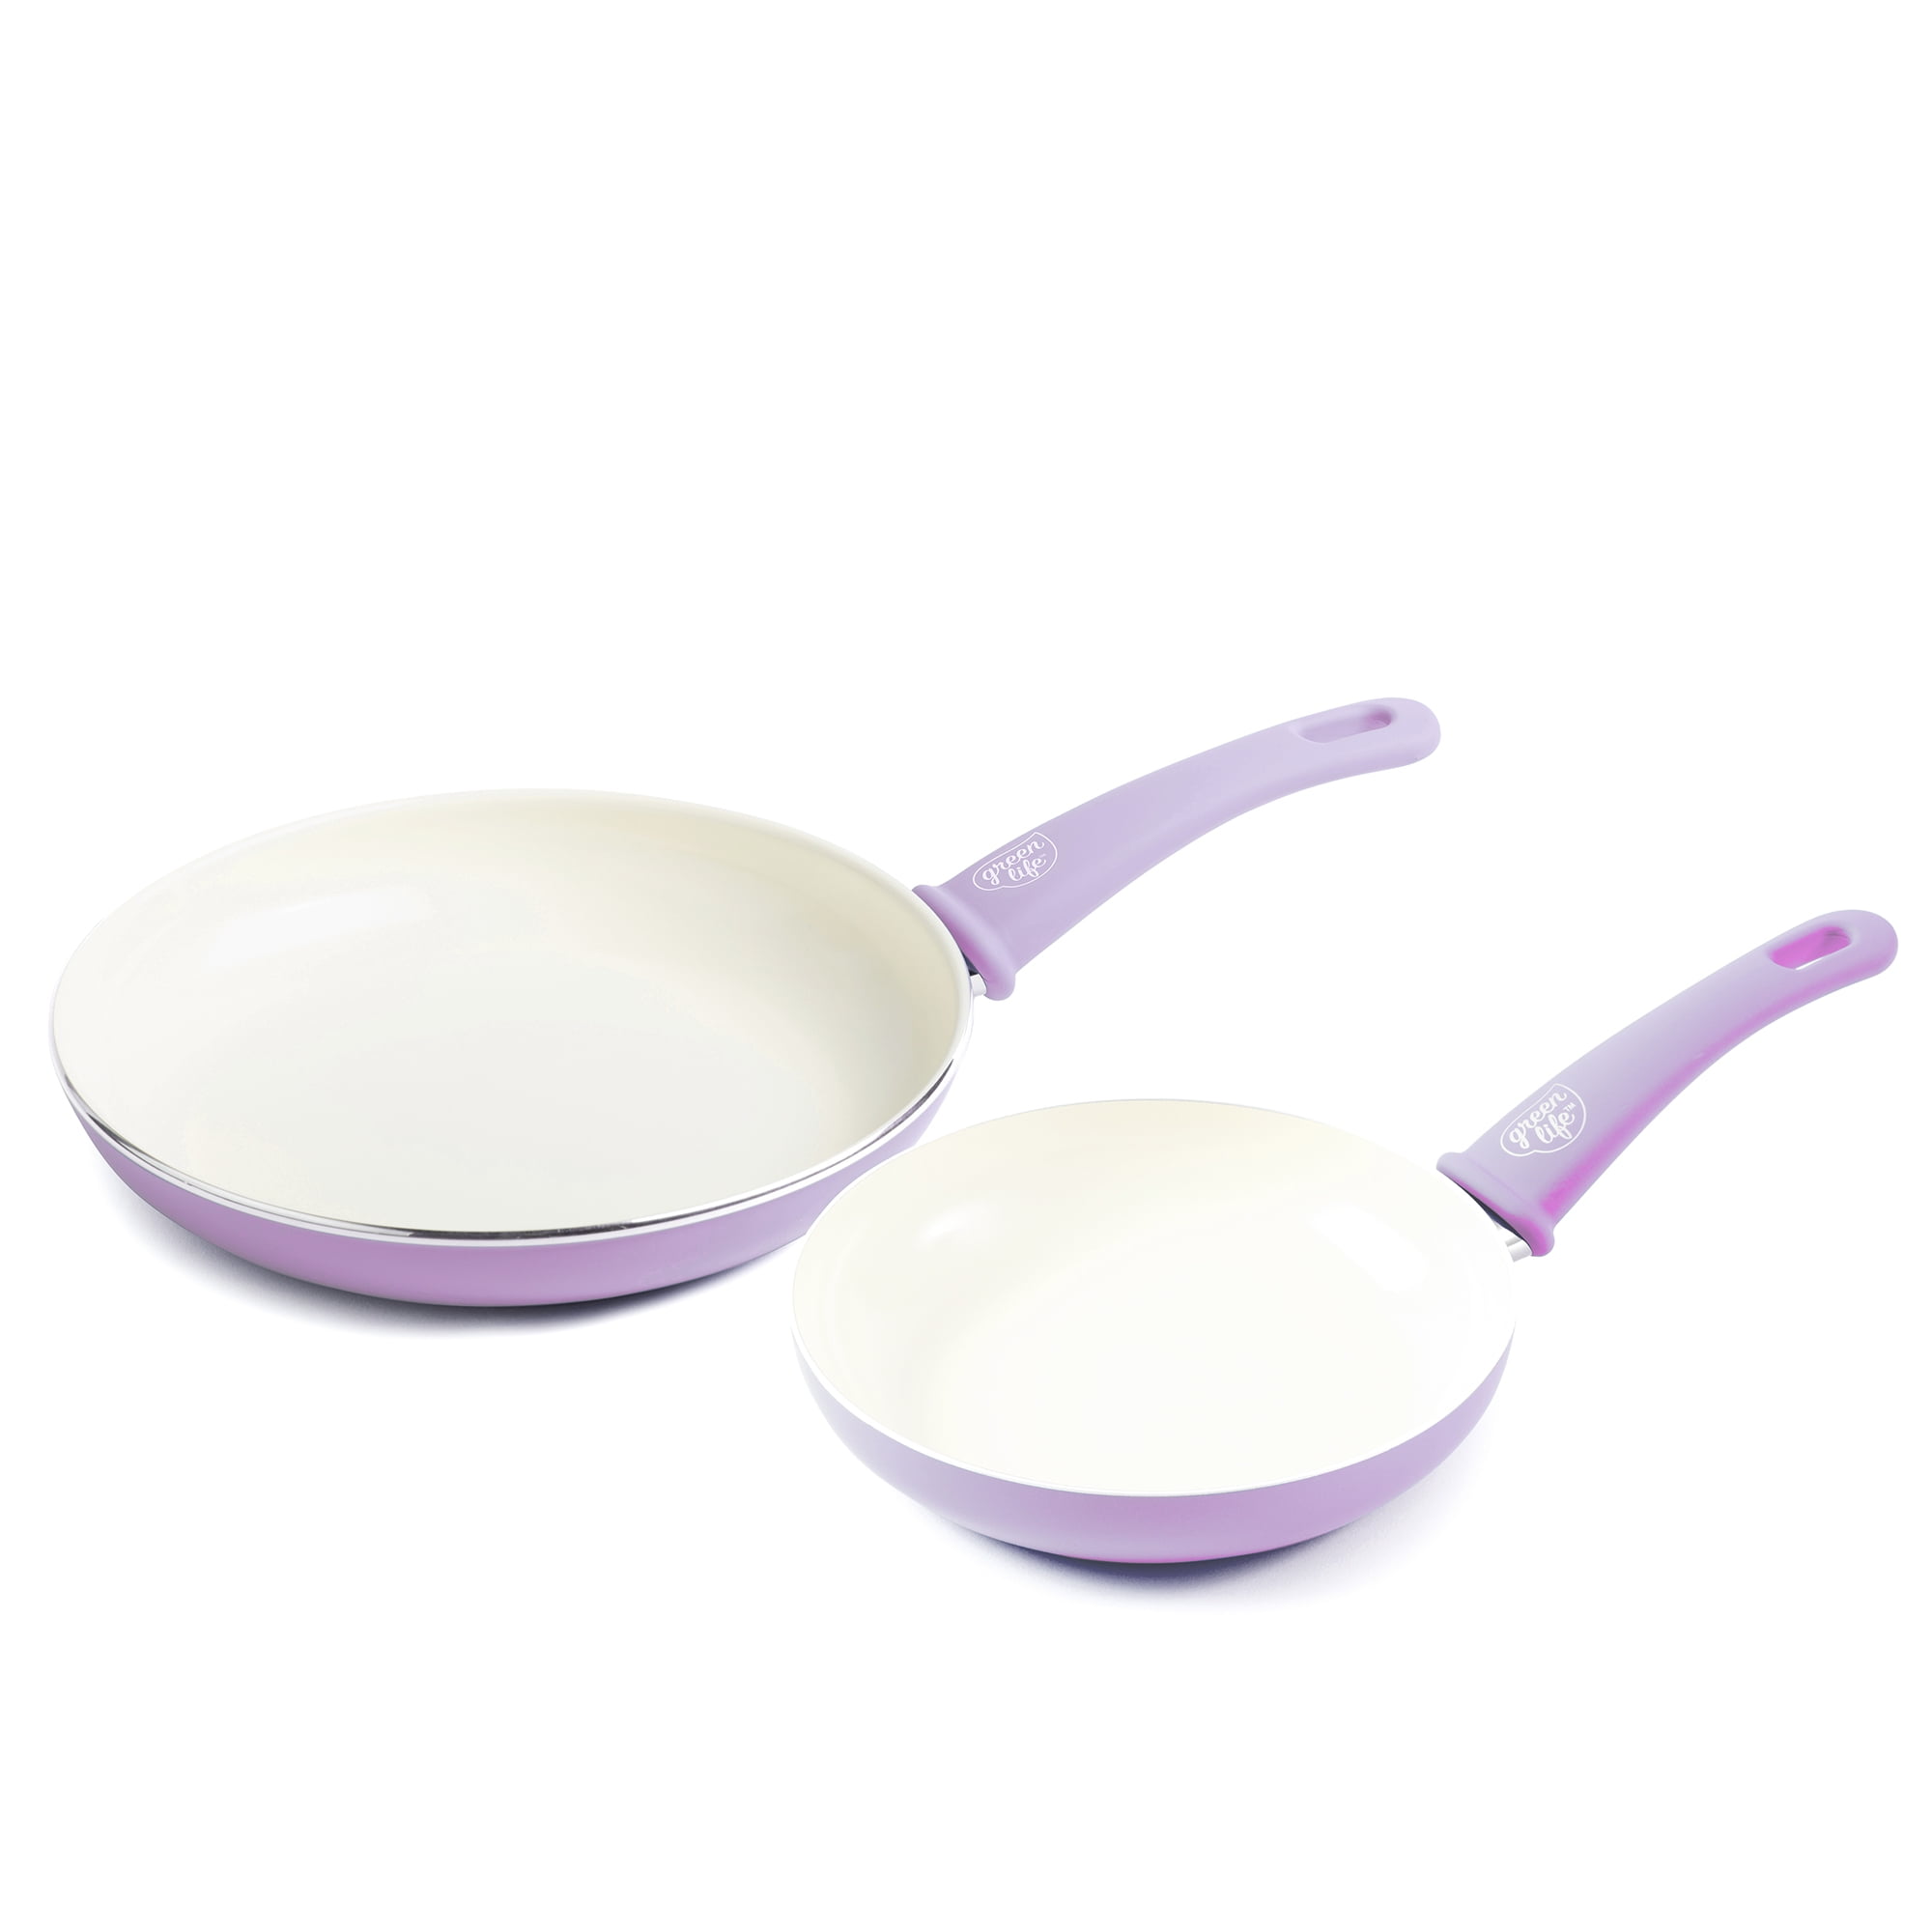 GreenLife Ceramic Non-Stick 7 and 10 2 Piece Fry Pan Set, Lavender 